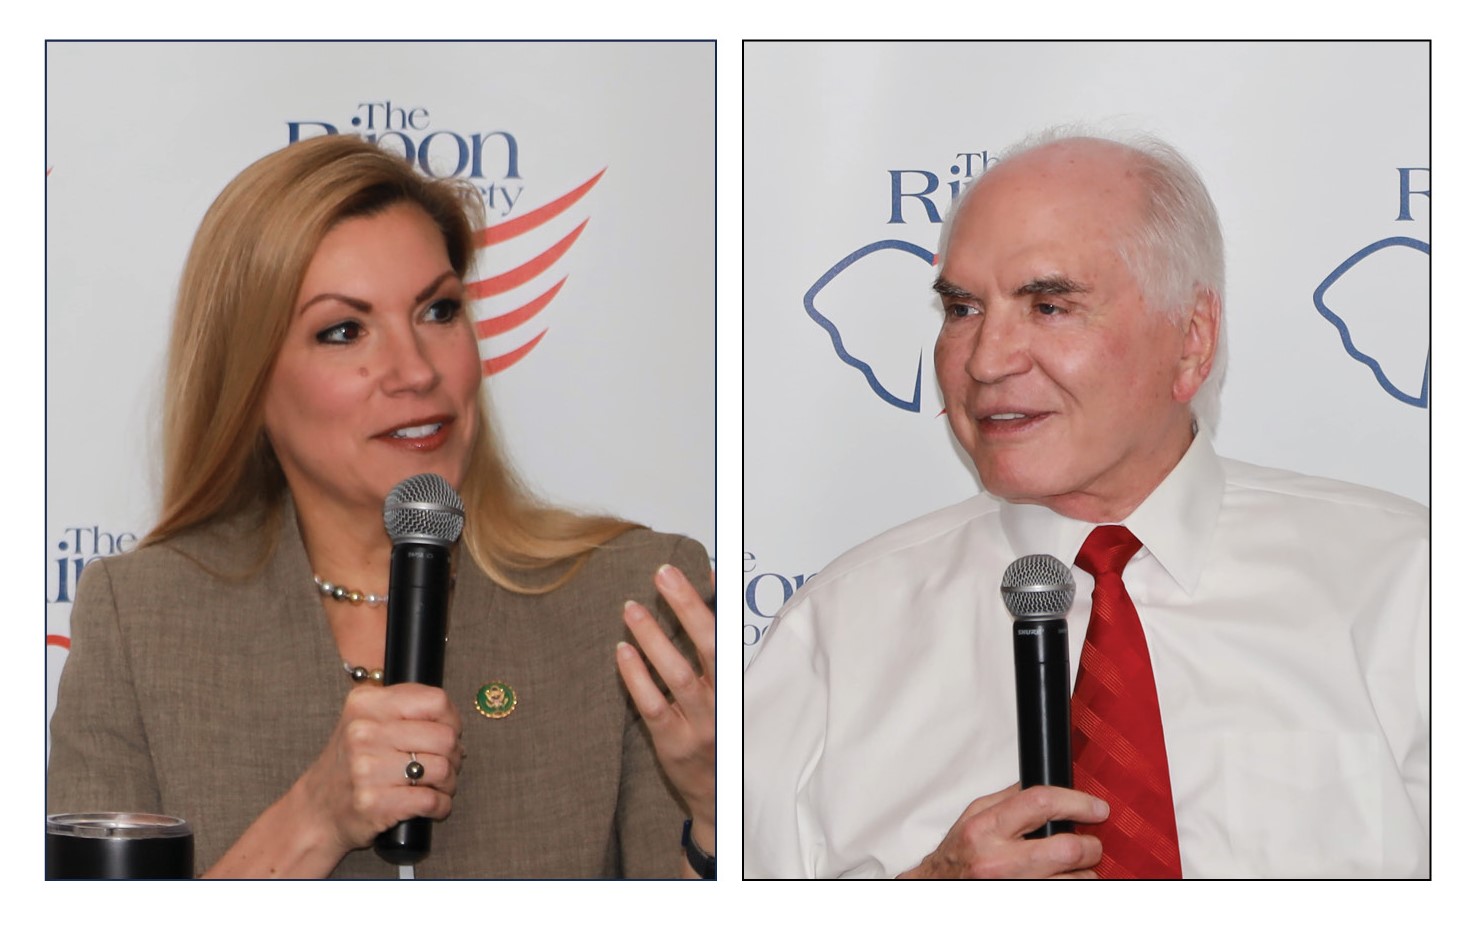 Kelly & Van Duyne Discuss Effort to Strengthen U.S. Competitiveness Both at Home and Abroad